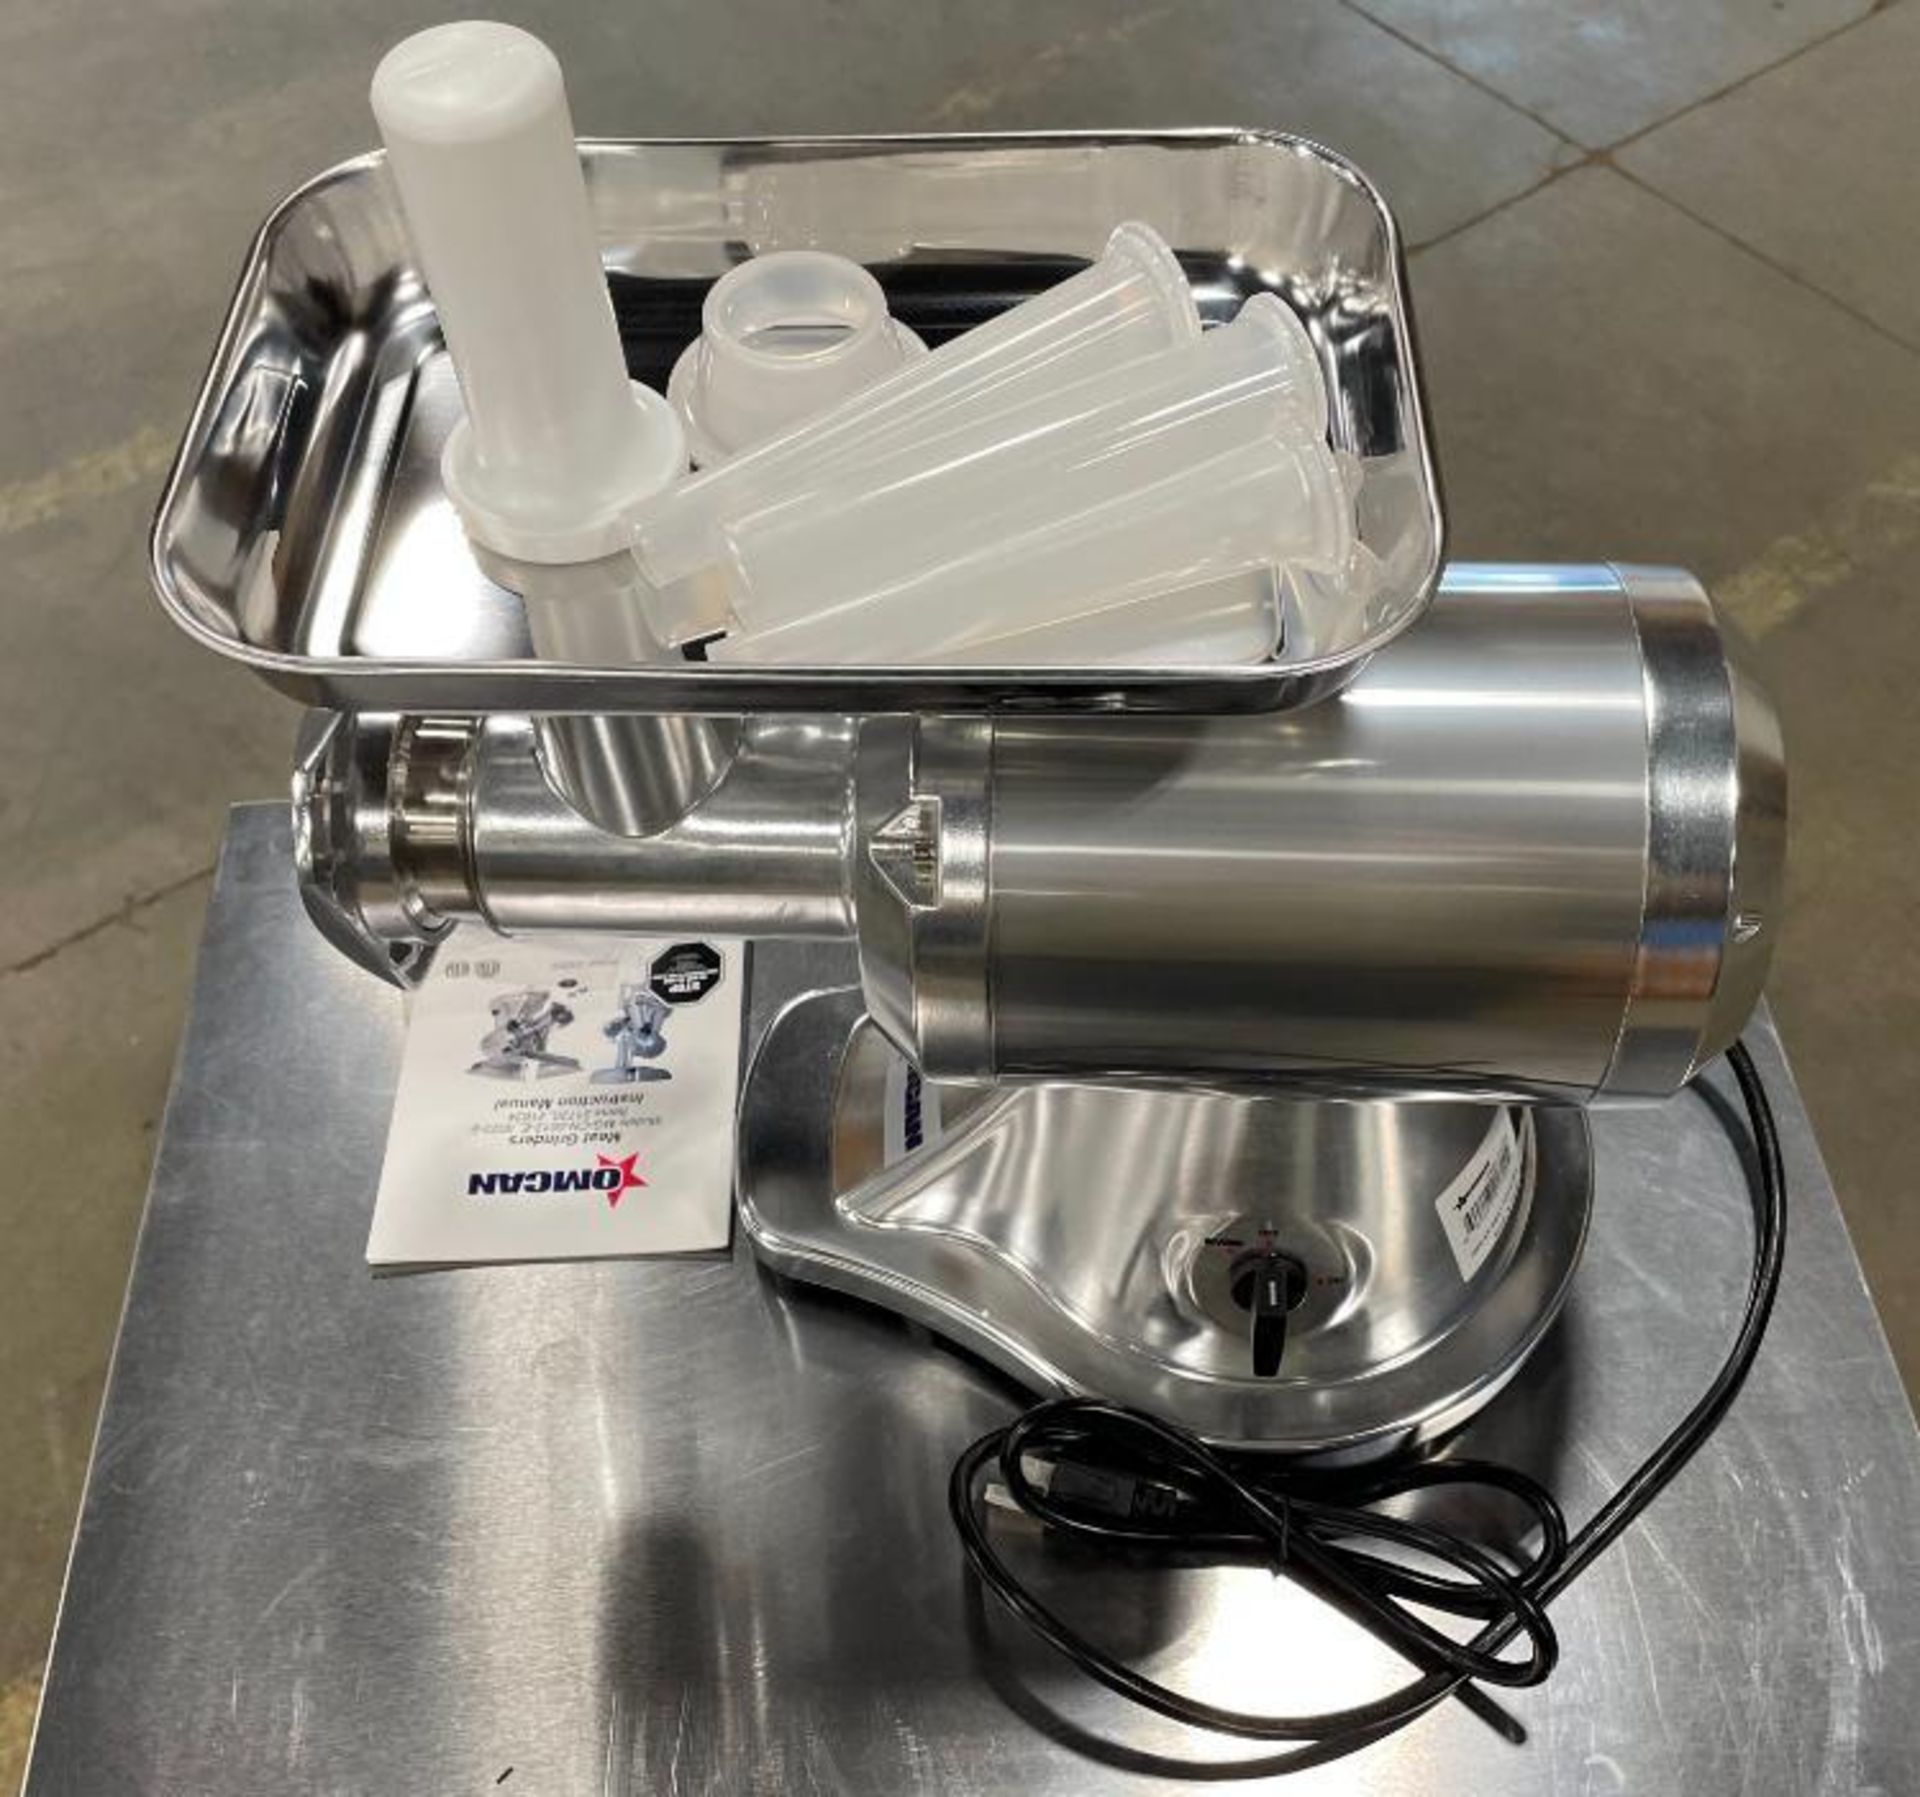 OMCAN 21720 #12 STAINLESS STEEL MEAT GRINDER 110V, 1HP - NEW - Image 11 of 12